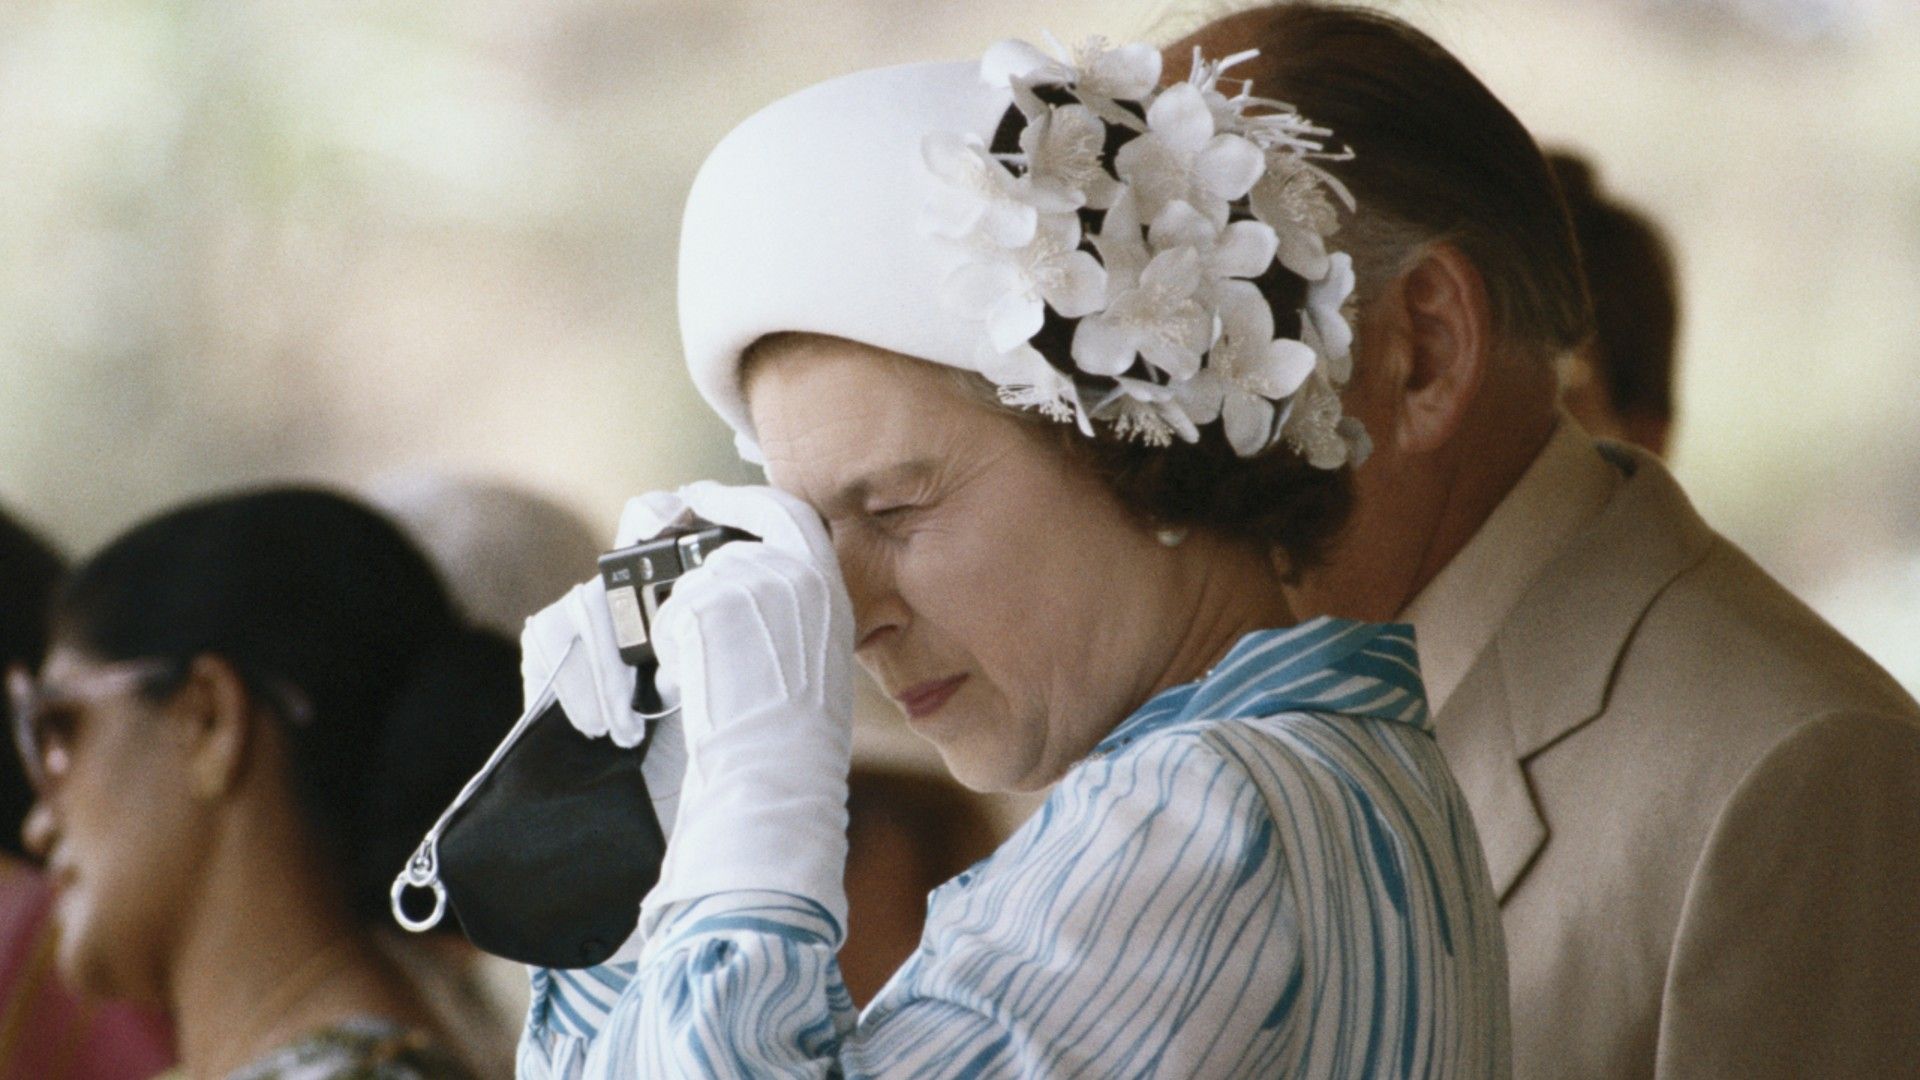 <p>                     Though most of her life was spent in front of the camera, on the rare occasion, Queen Elizabeth II was seen taking photographs of her own during her royal tours. One such occasion was during an October 1981 trip to Sri Lanka.                   </p>                                      <p>                     During this trip, the Queen was photographed taking a snap on her Canon Sure Shot 110 camera, one of her many beloved cameras. It wasn’t clear what she was taking a photo of, but the aim of the trip – the second of three she made during her reign – was to visit the construction of Sri Lanka’s Victoria Dam, Sri Lanka’s largest hydroelectric project, which was constructed by a UK firm.                   </p>